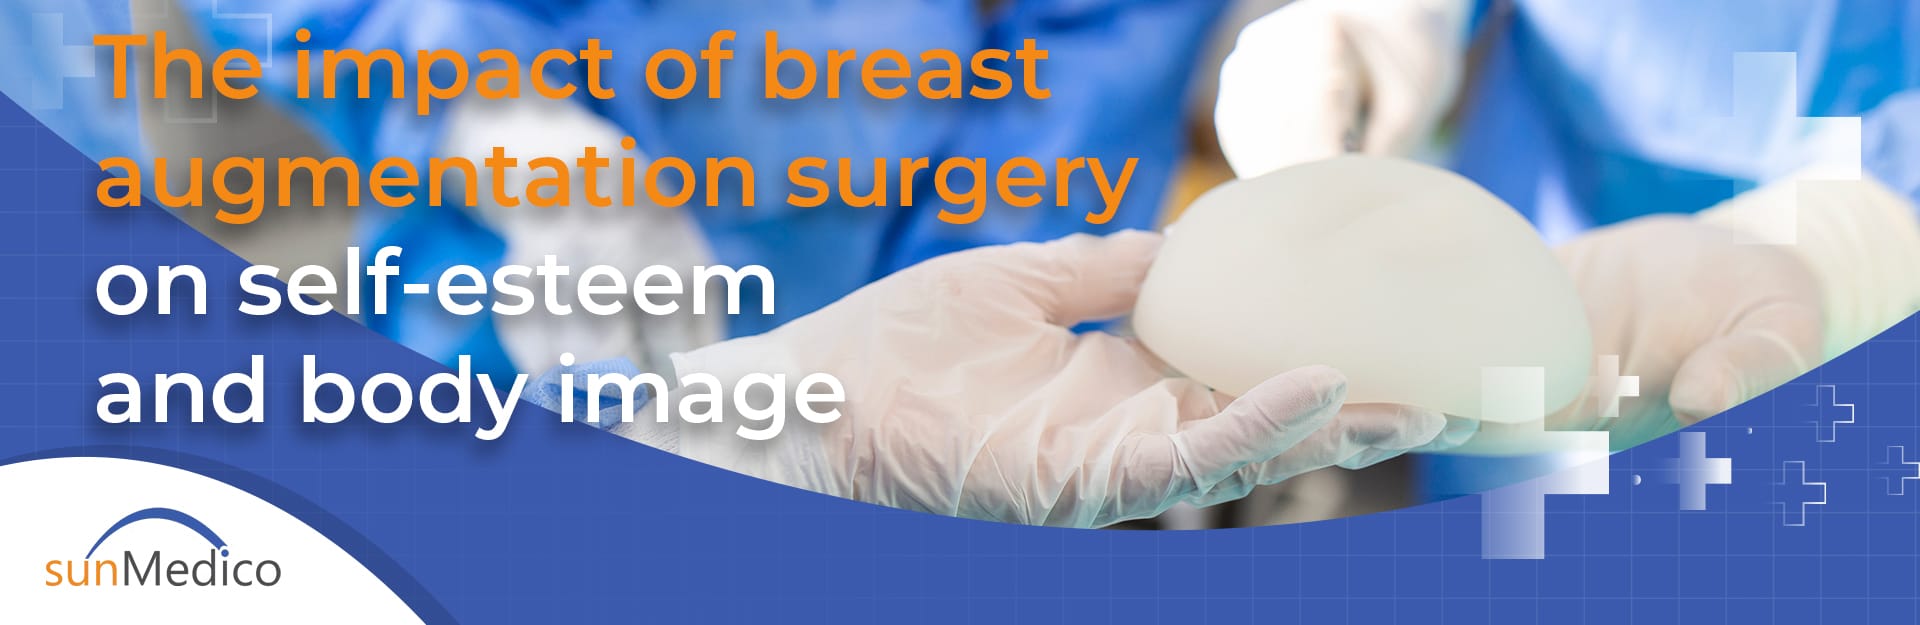 The impact of breast augmentation surgery on self-esteem and body image.